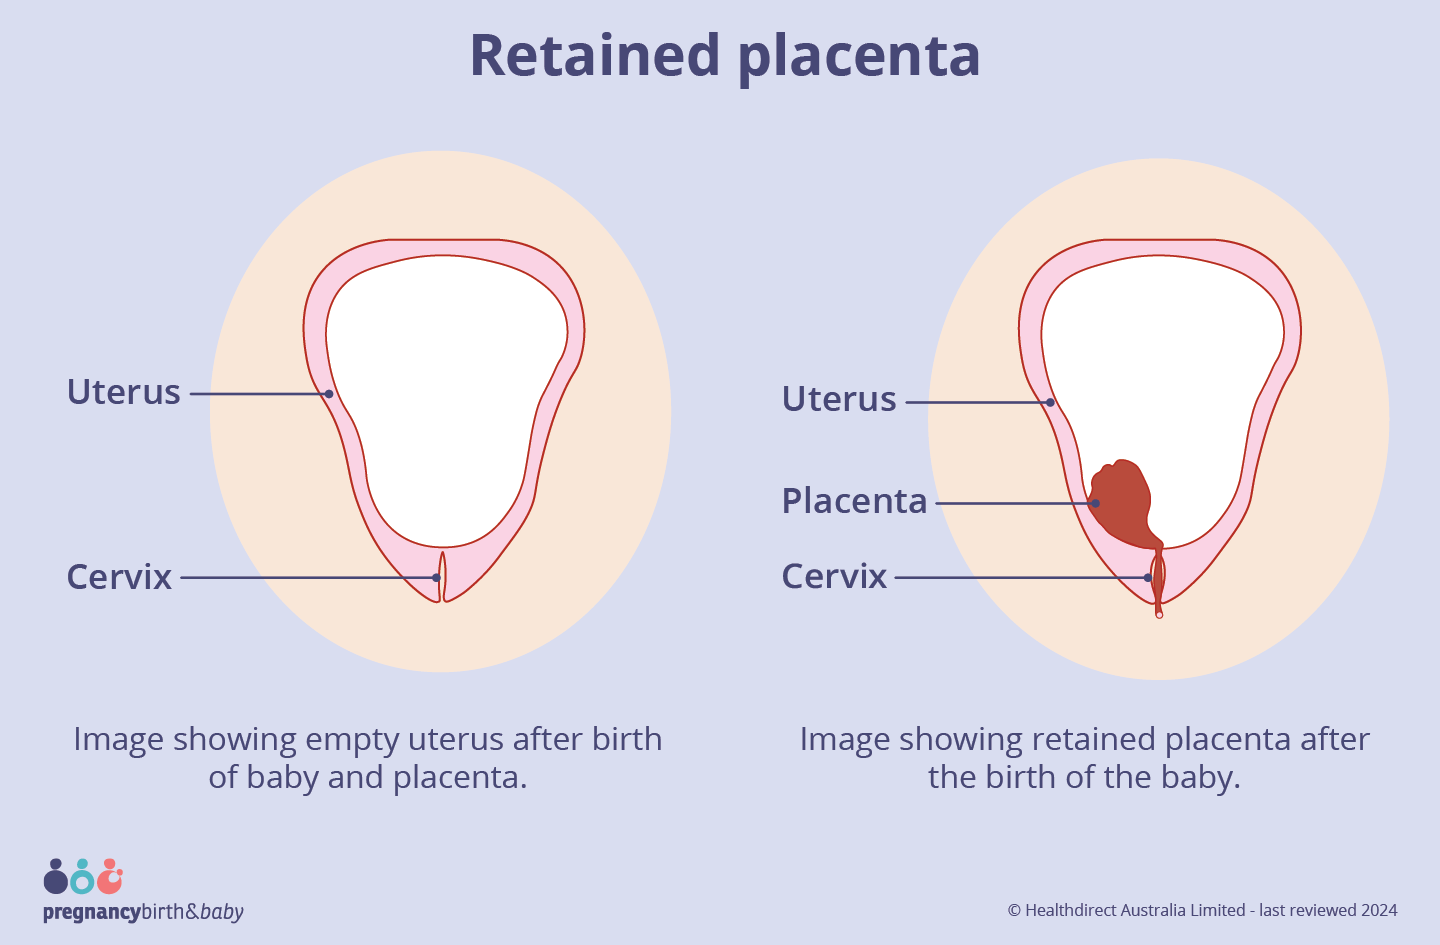 Image showing retained placenta after the birth of the baby.